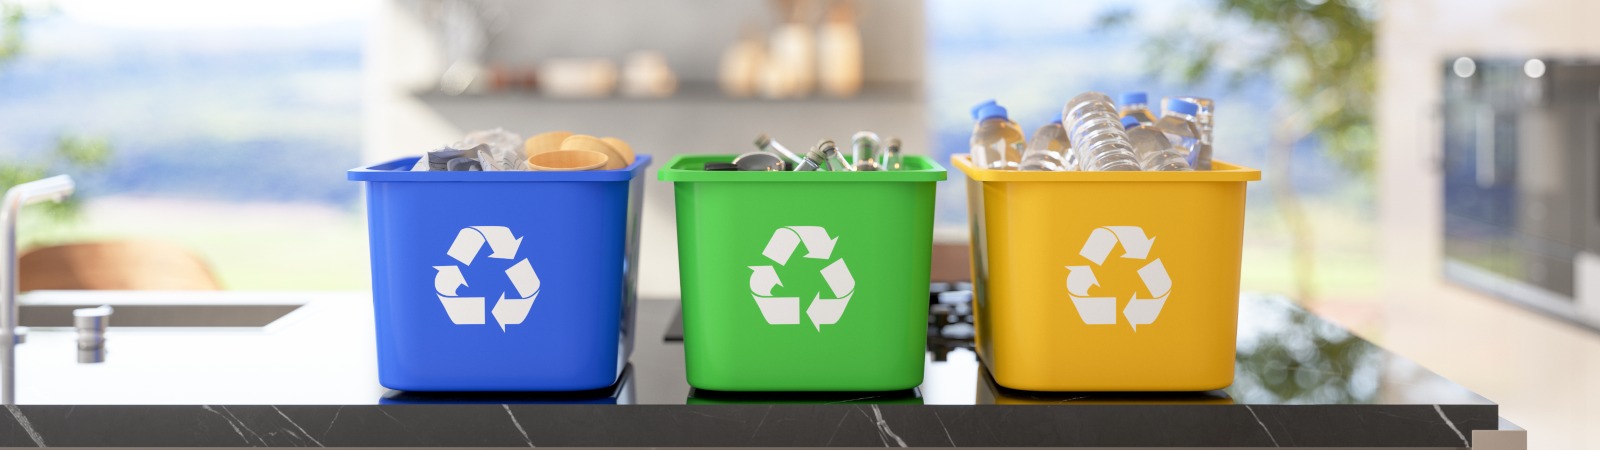 Reduce, Reuse, Recycle - 3Rs of Waste Management for Environmental Sustainability